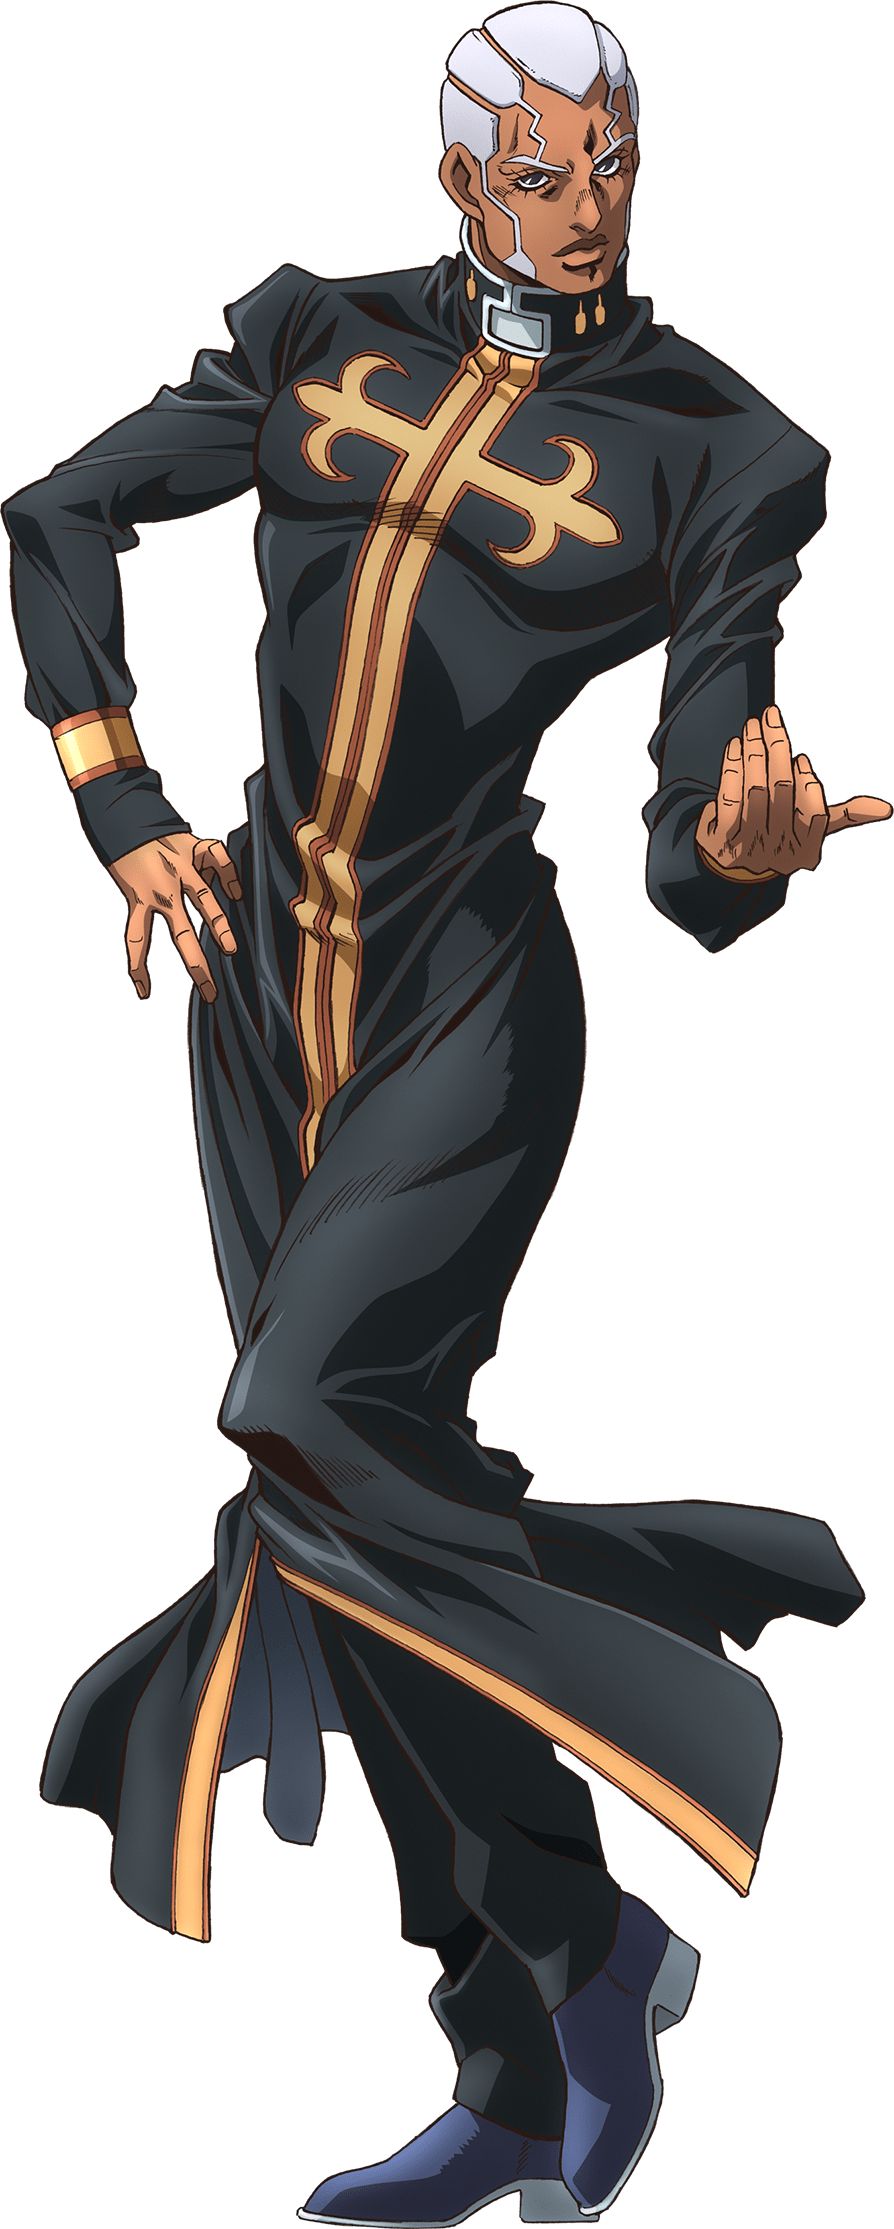 JoJo Enrico Pucci or DIO Who Is The Better Villain